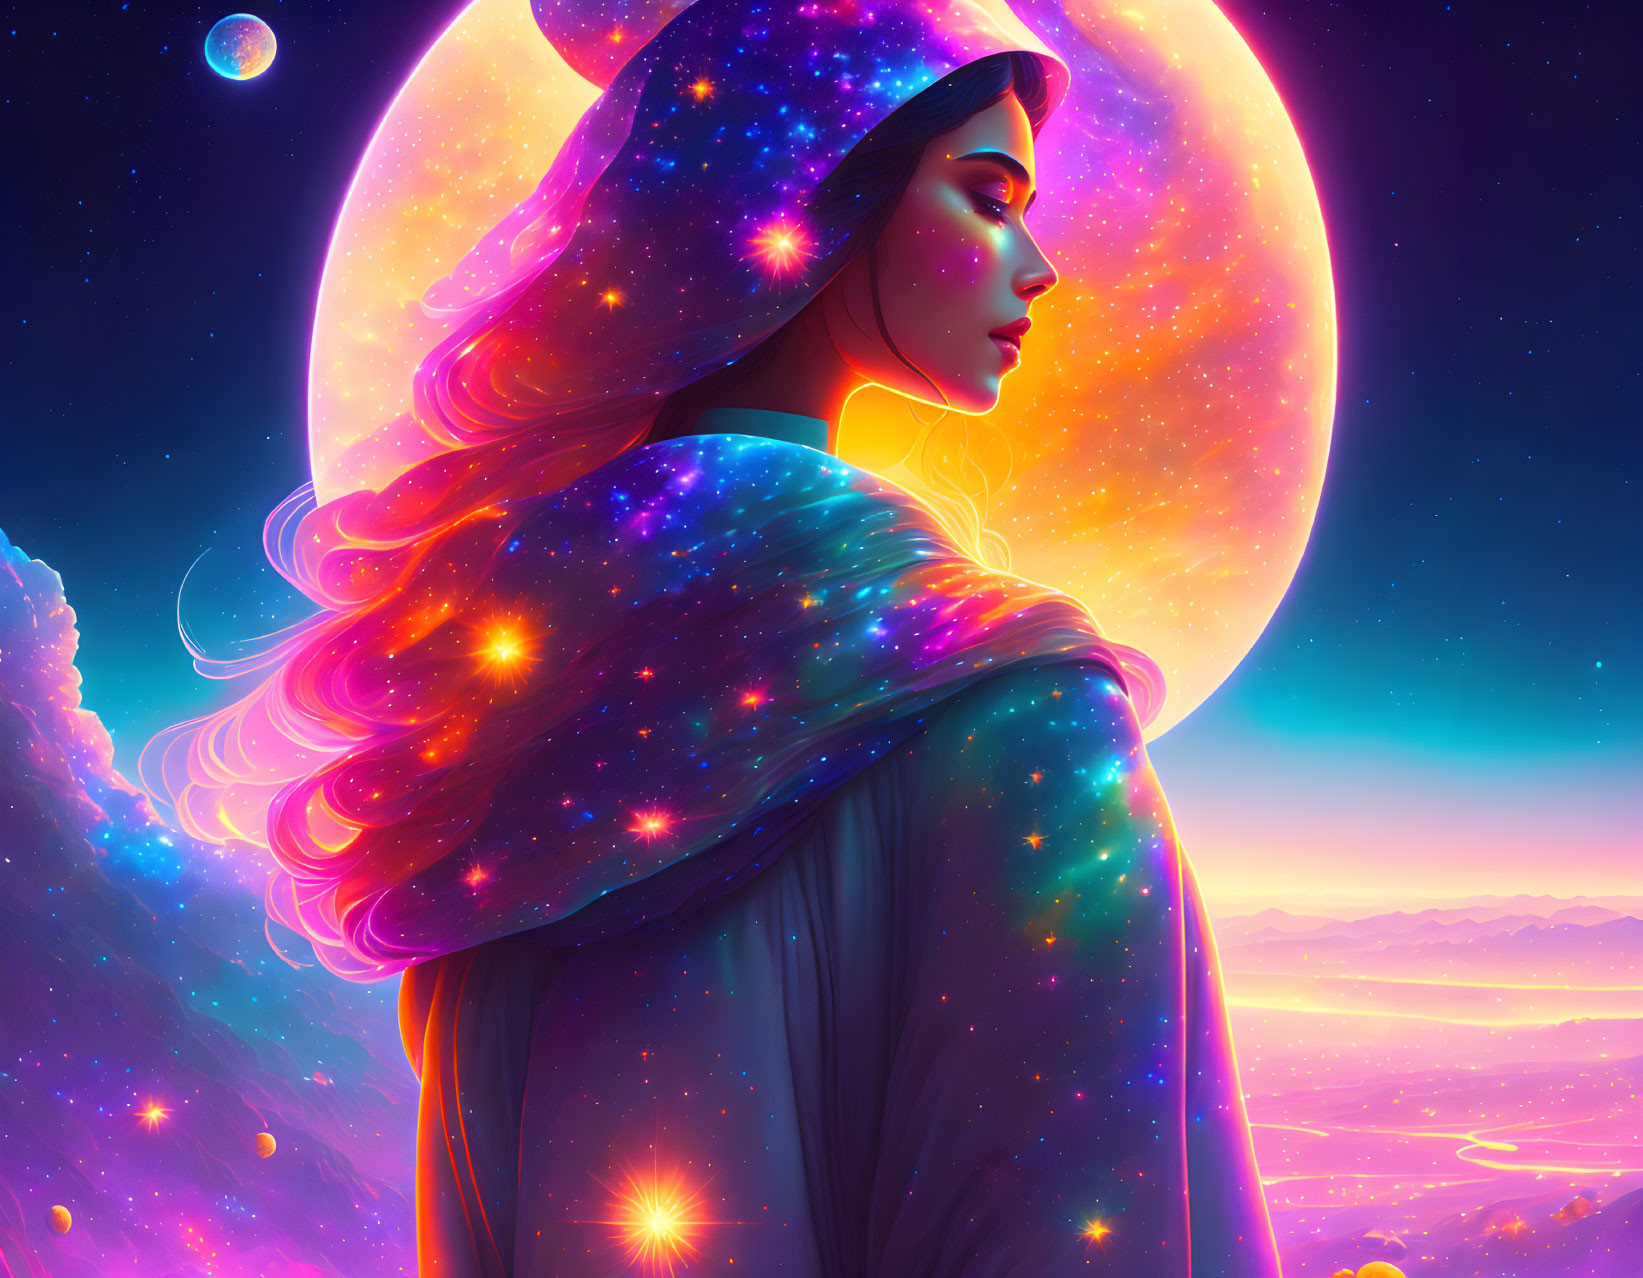 Woman's profile with cosmic theme: star-adorned hair and cloak, set against moon and neb